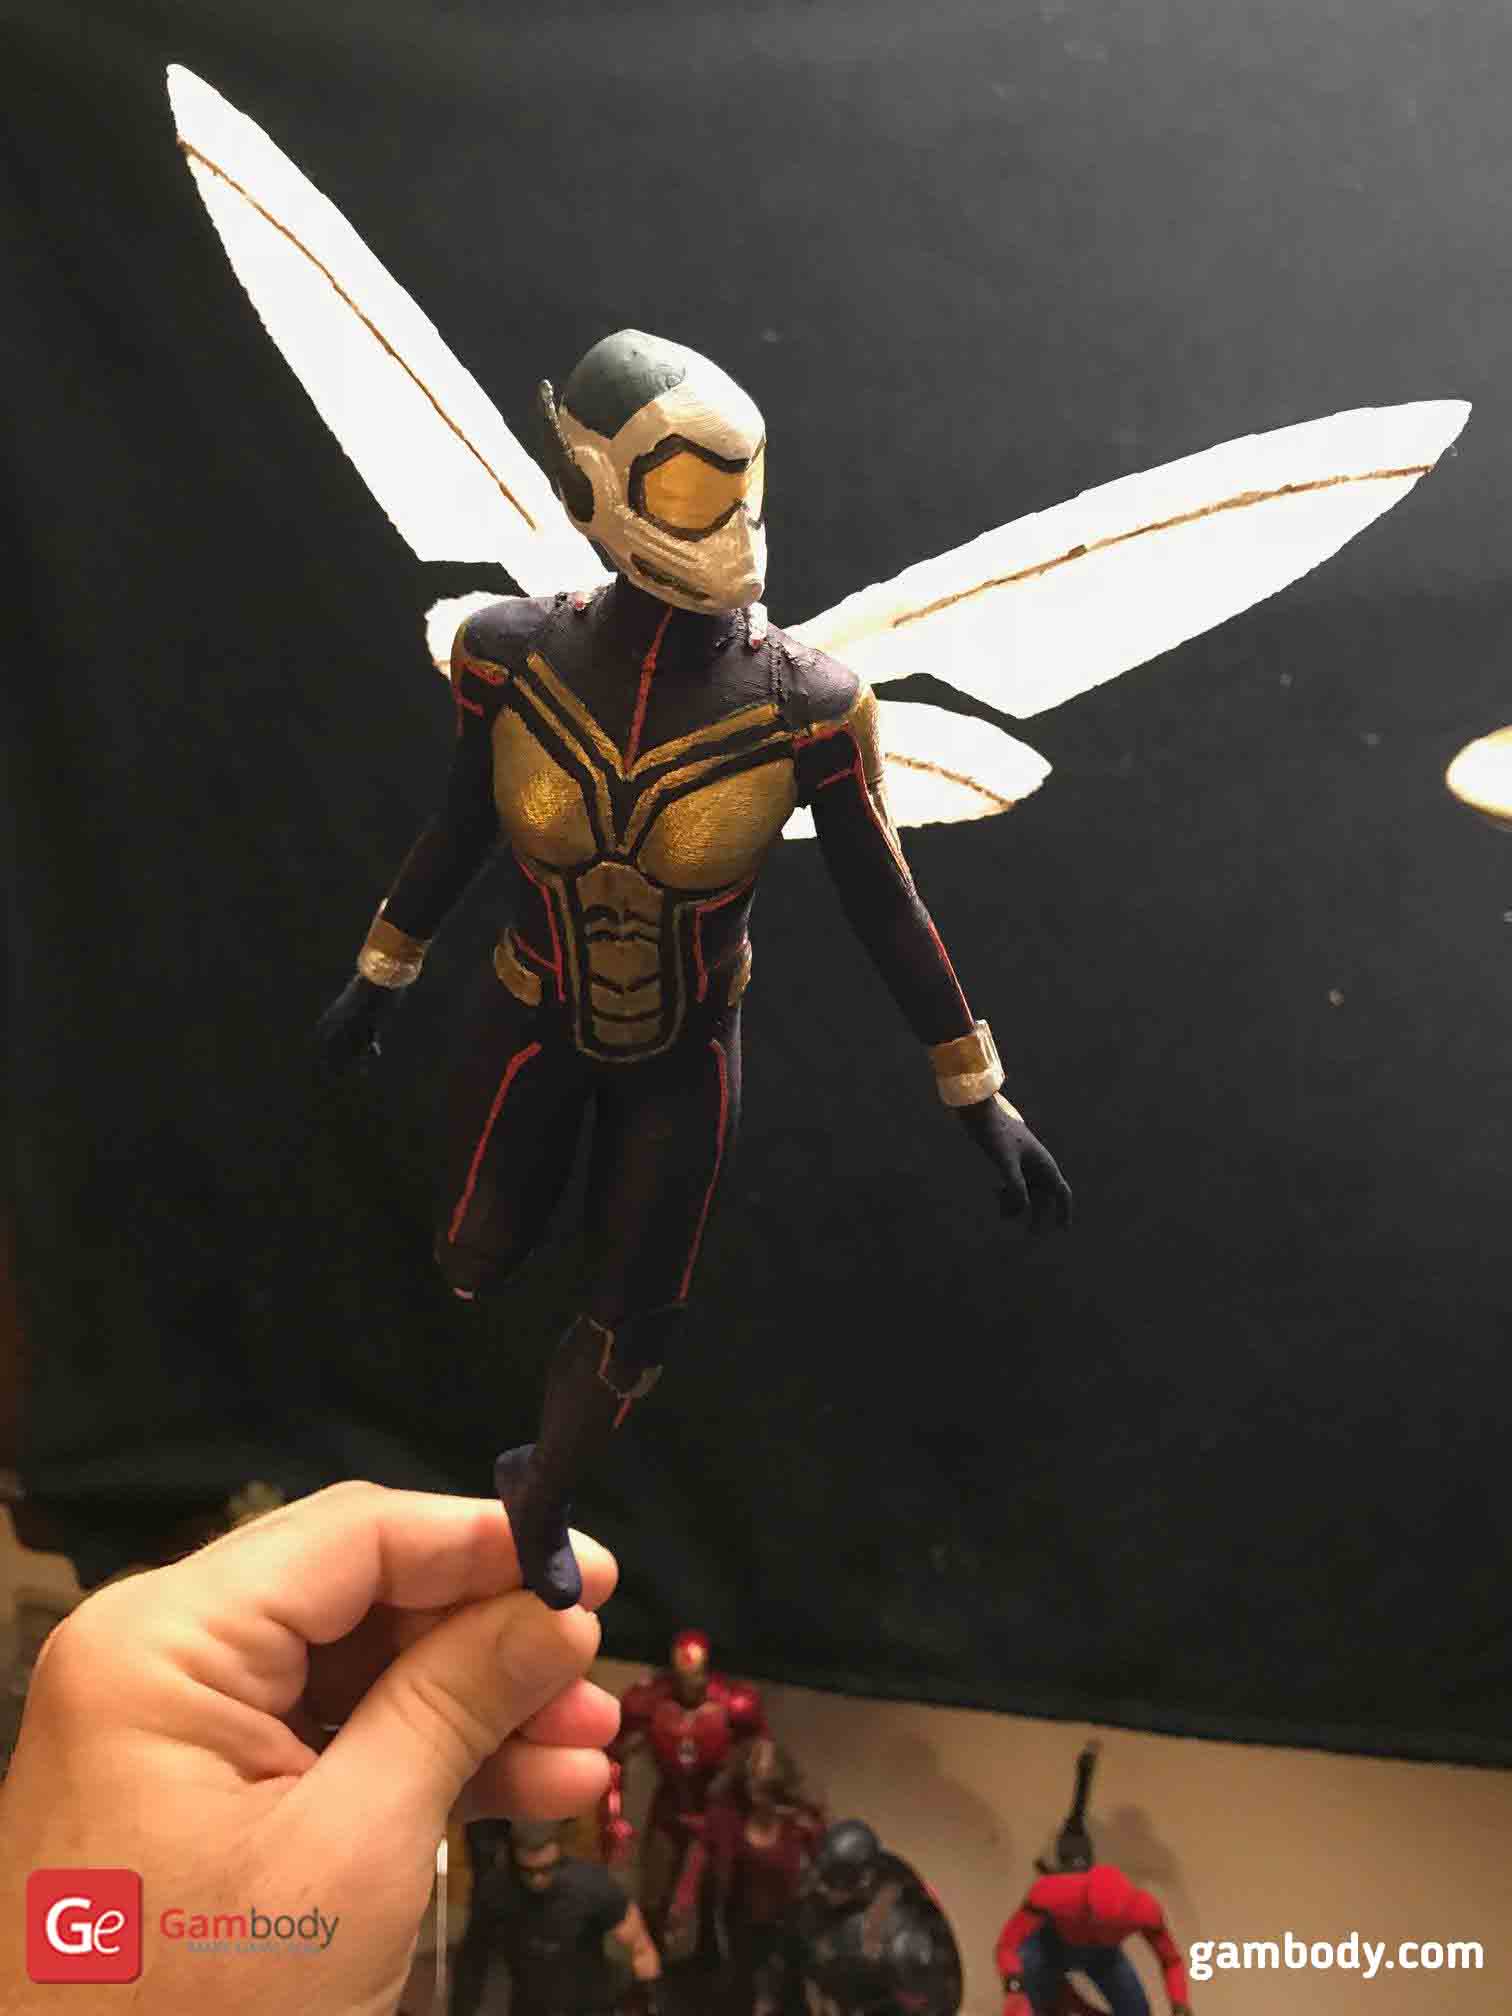 The Wasp 3D Printing Figurine